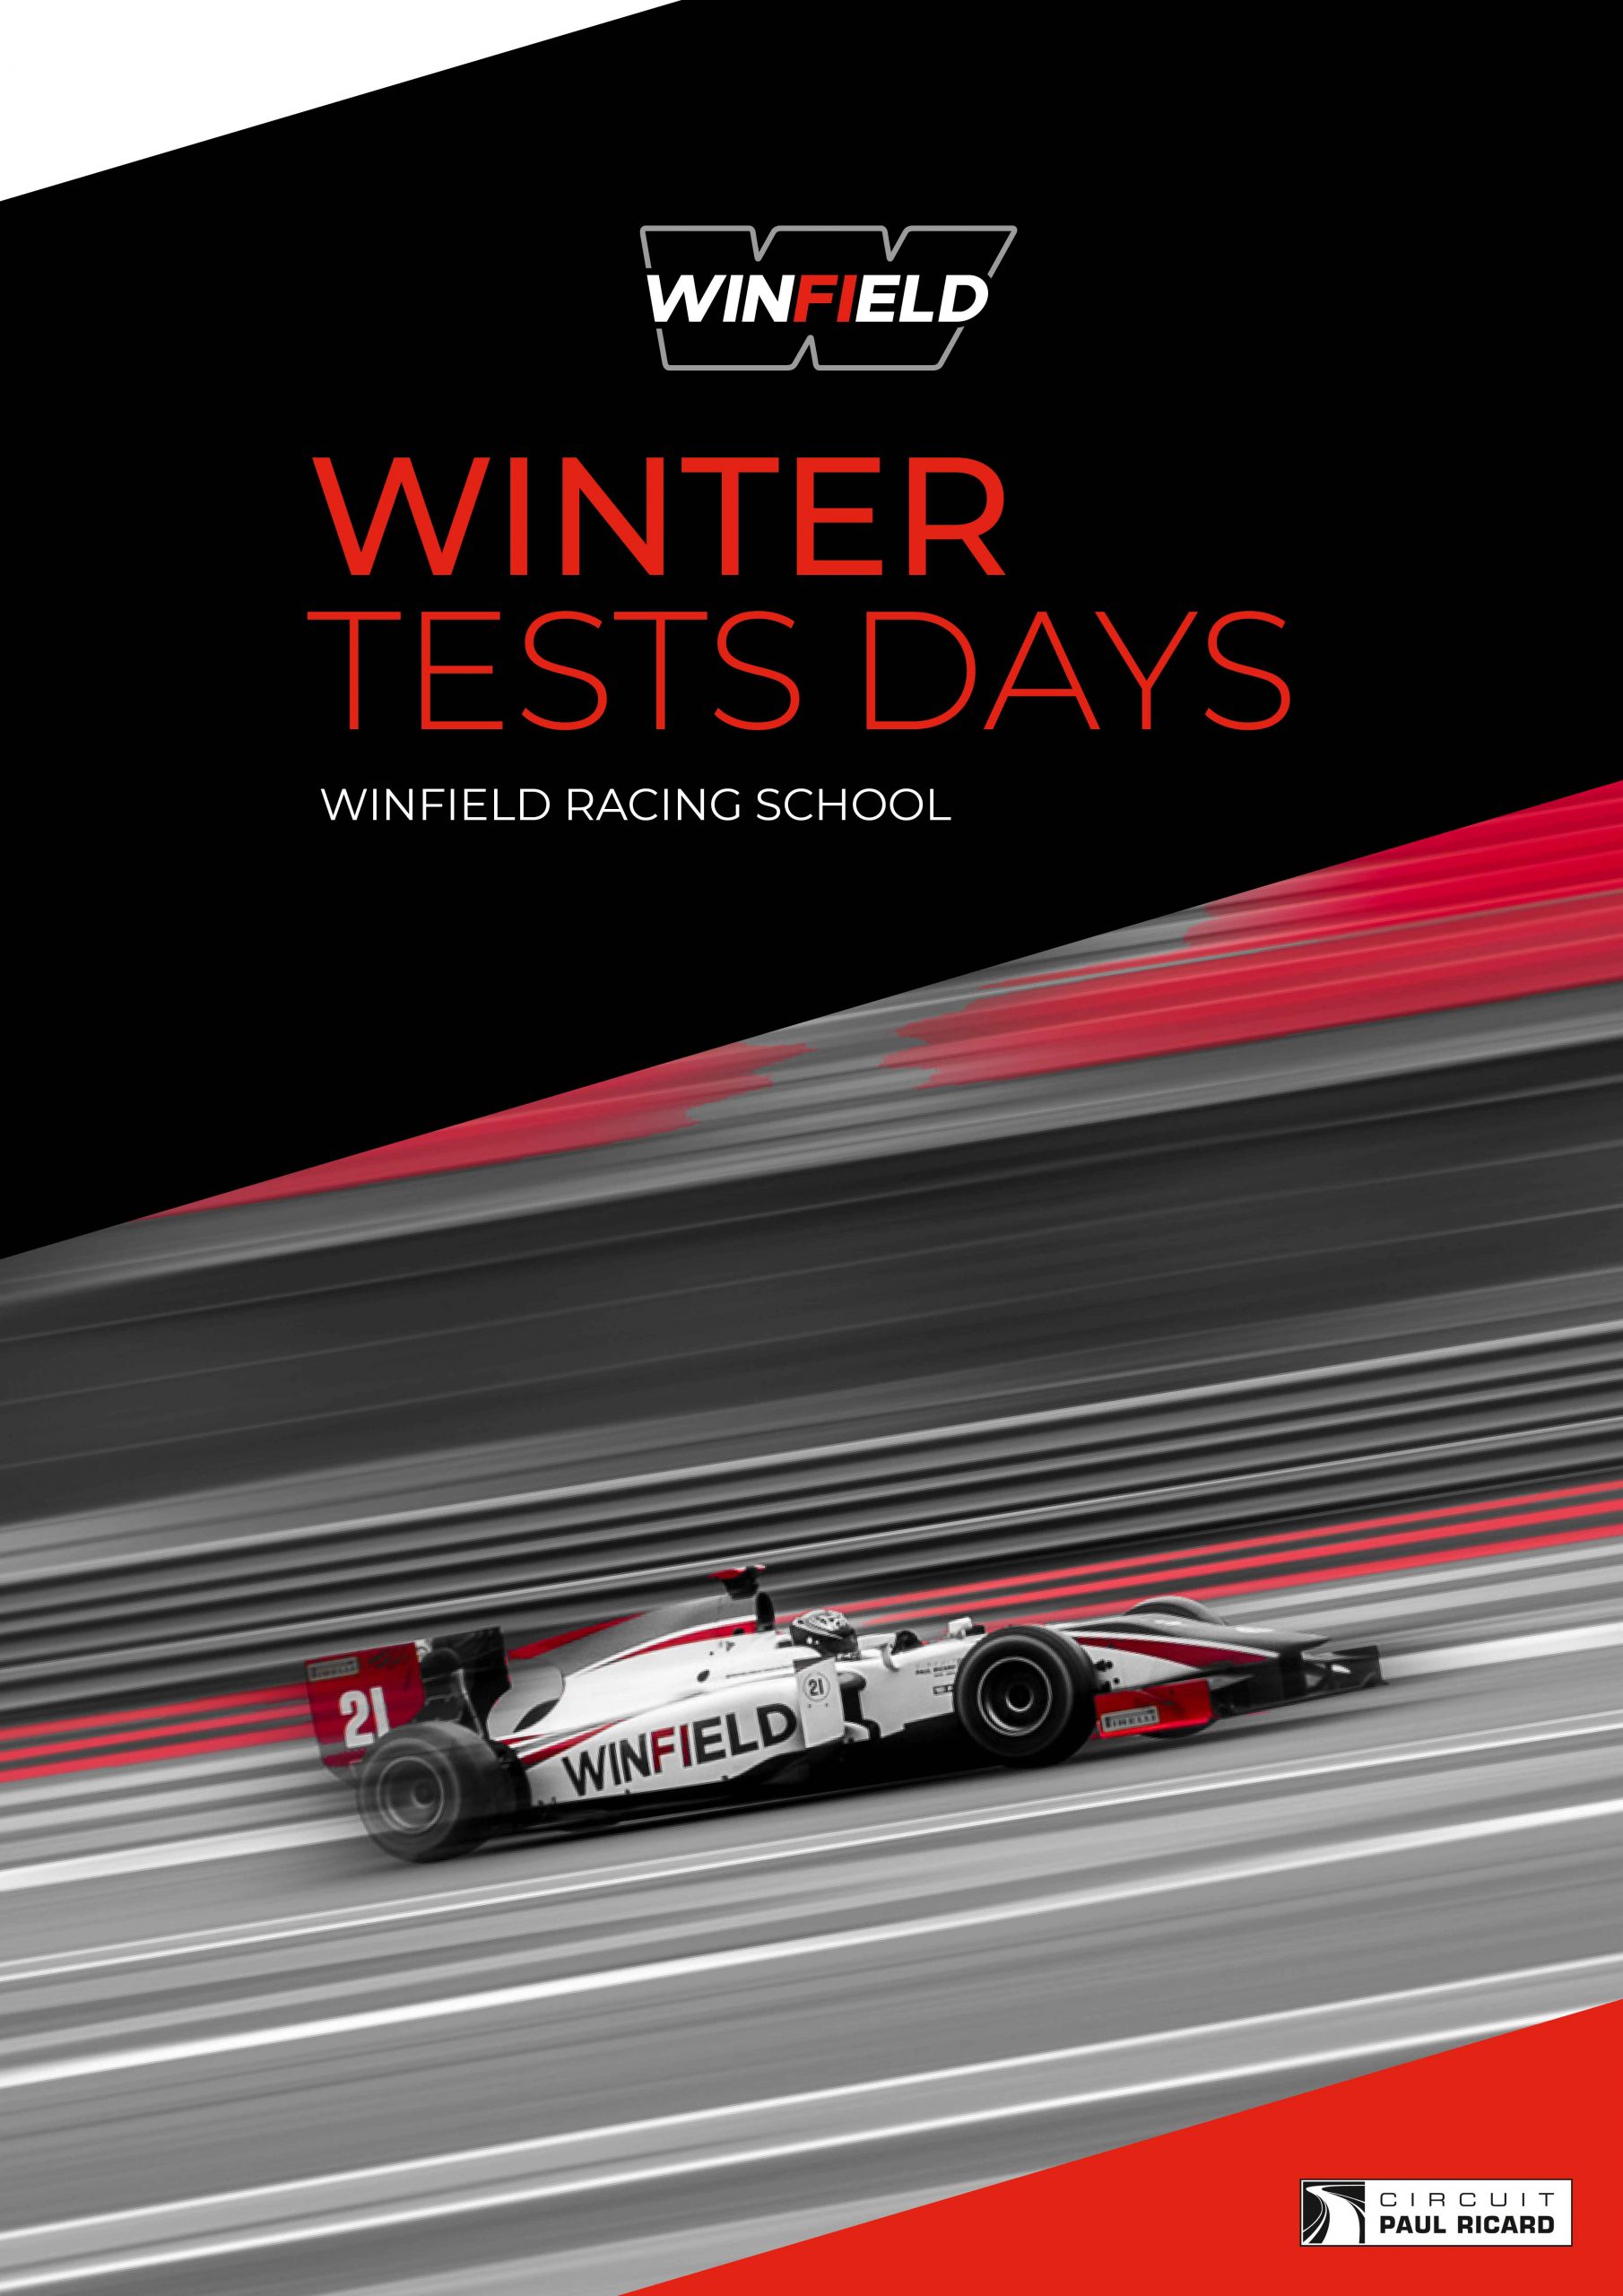 circuit paul ricard winfield tests days february 12th